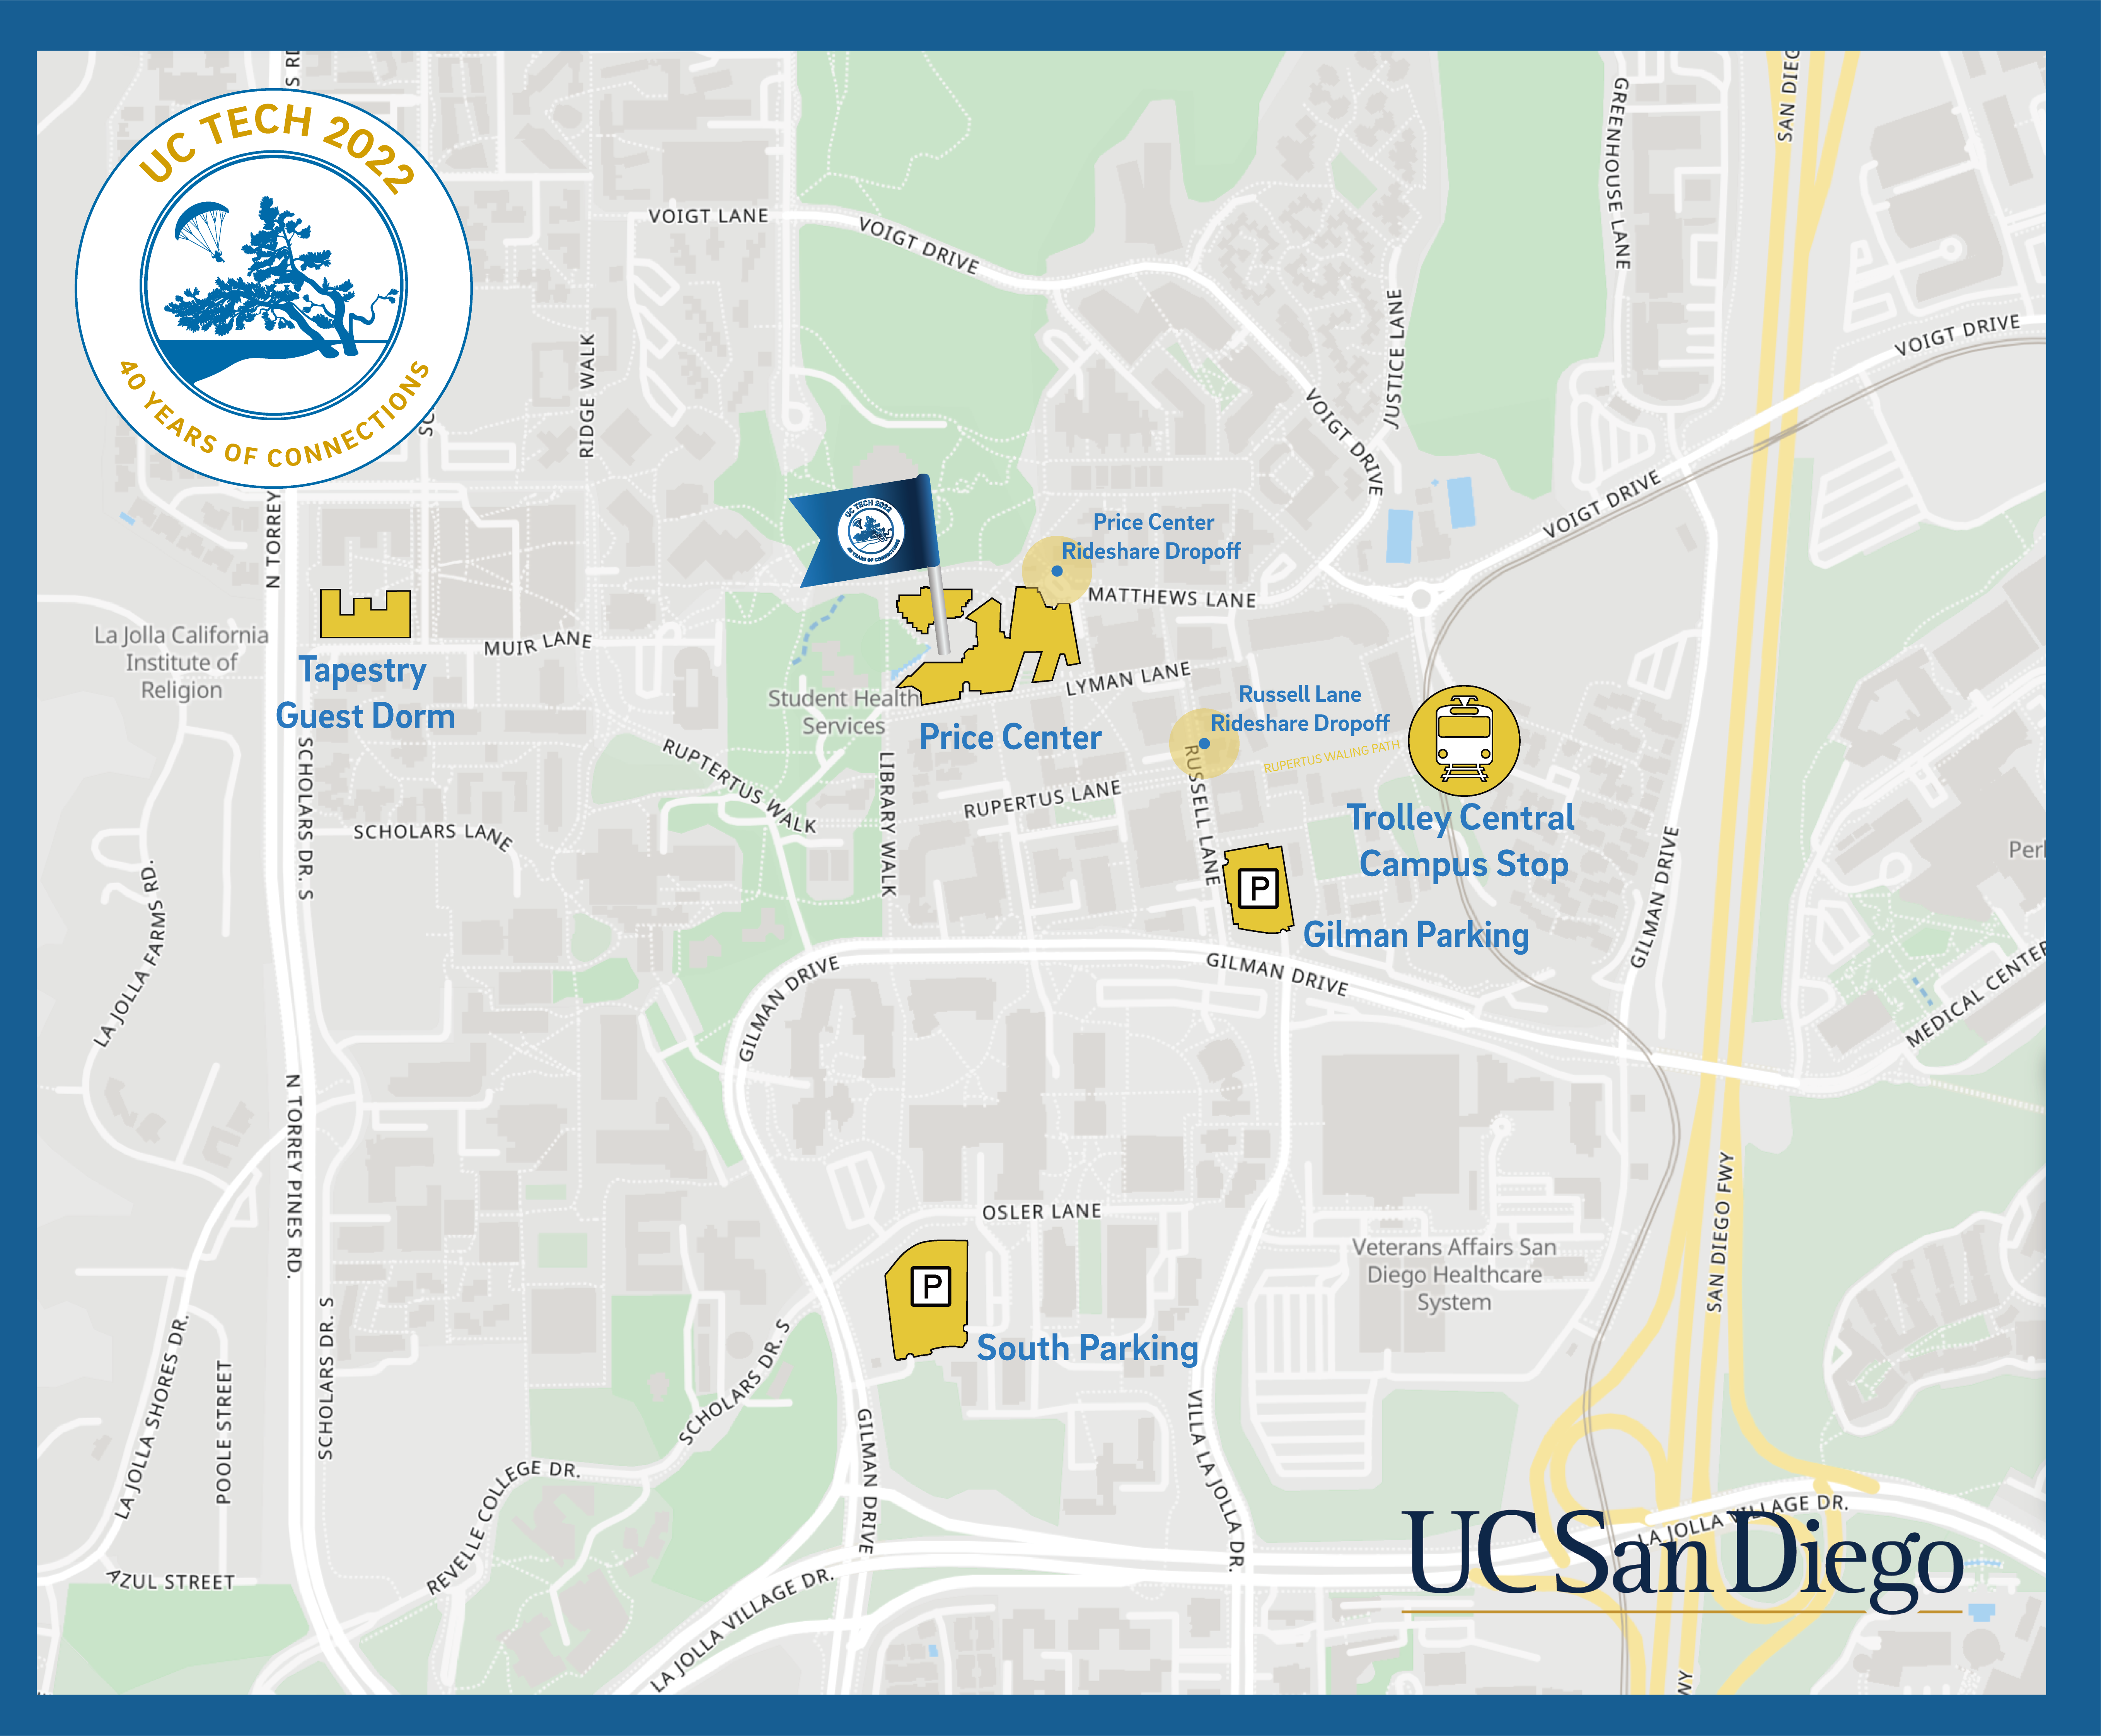 UCSD campus map